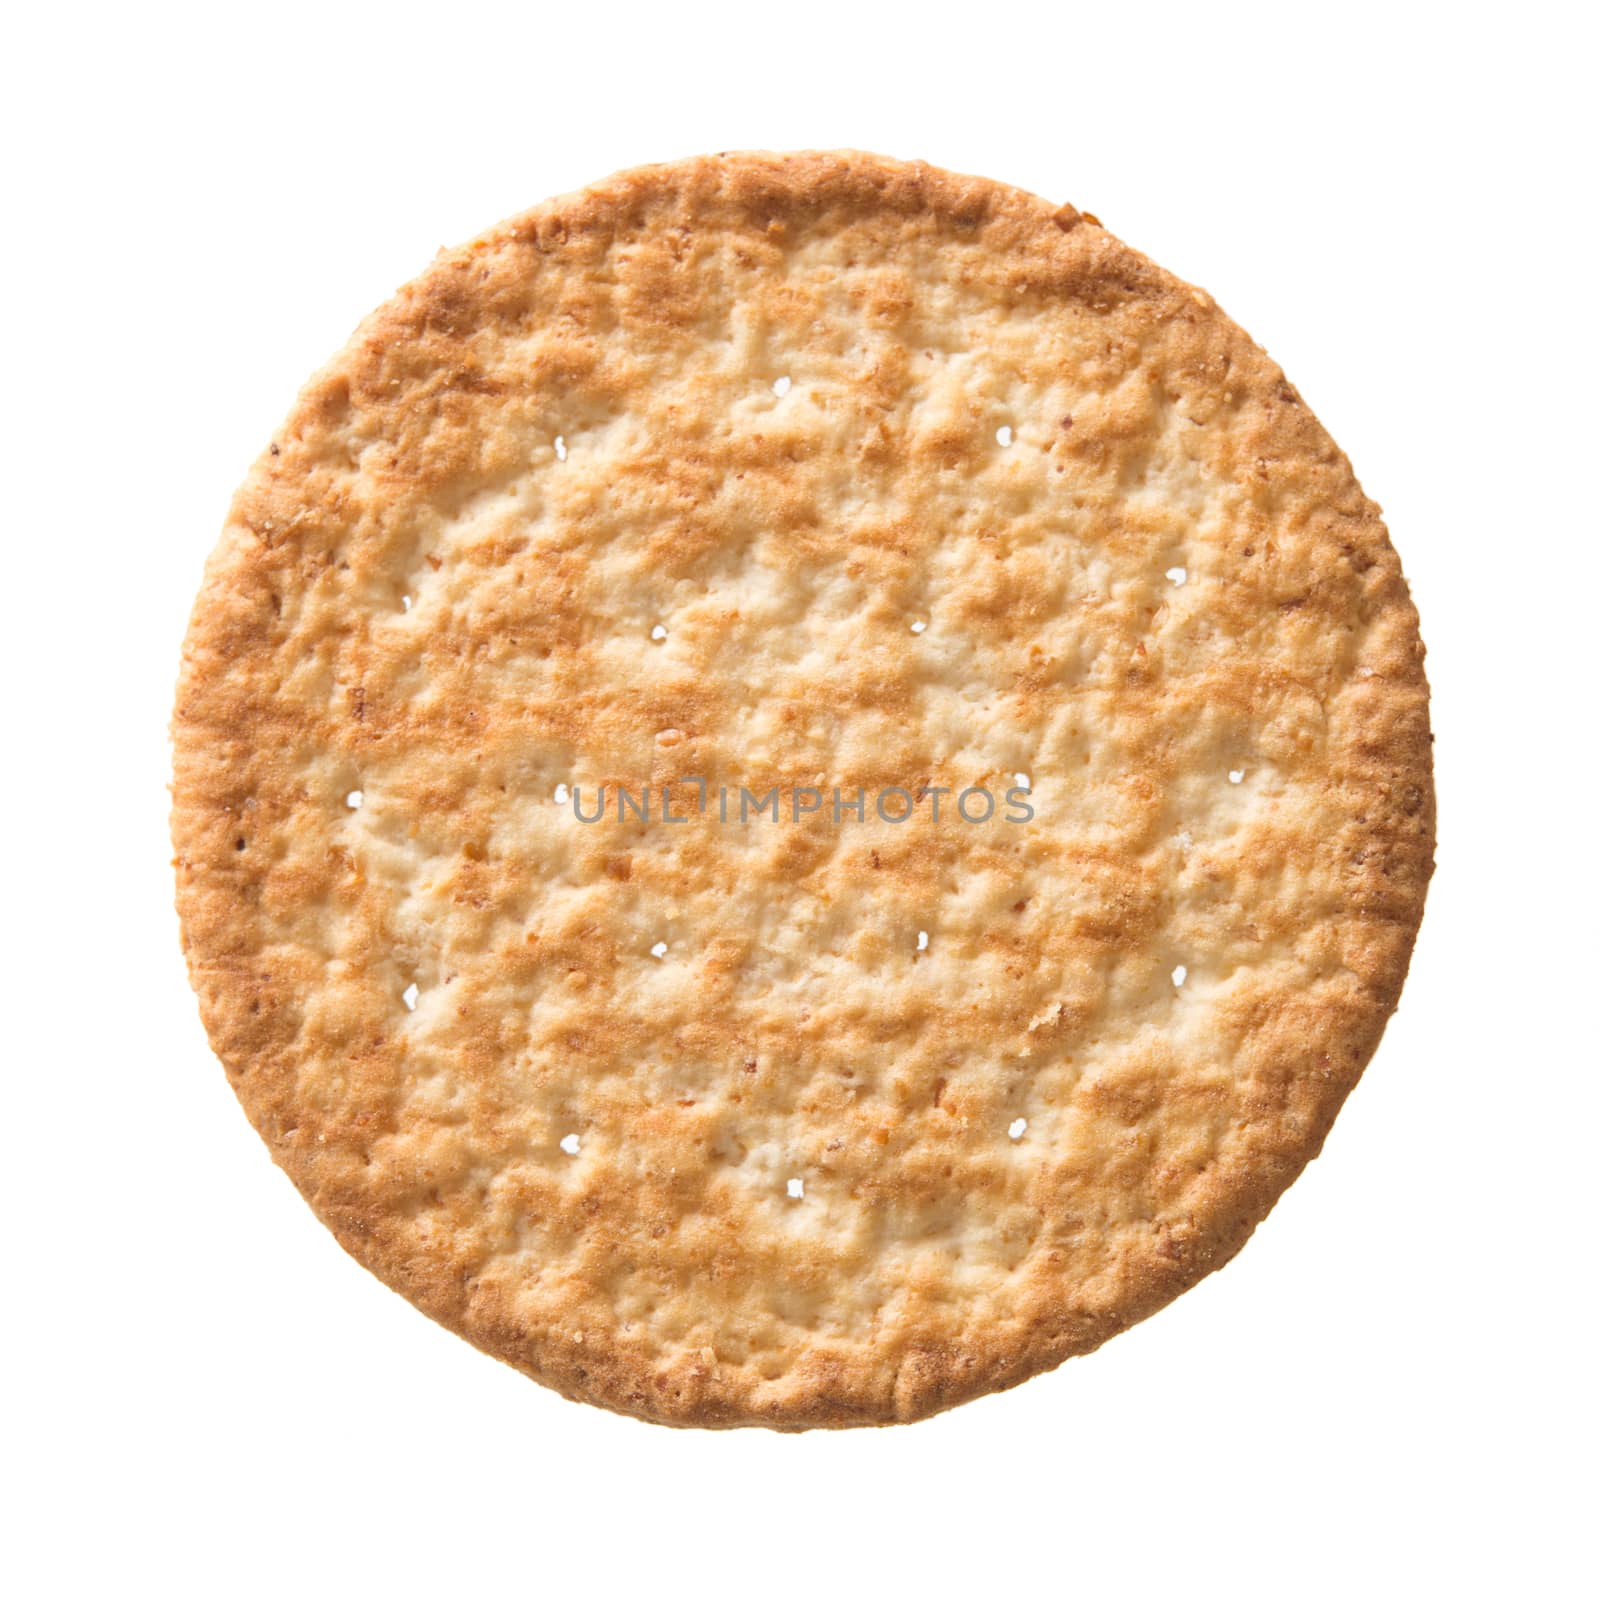 Top view wheat cracker. A single piece whole meal oat biscuit isolated on white background.